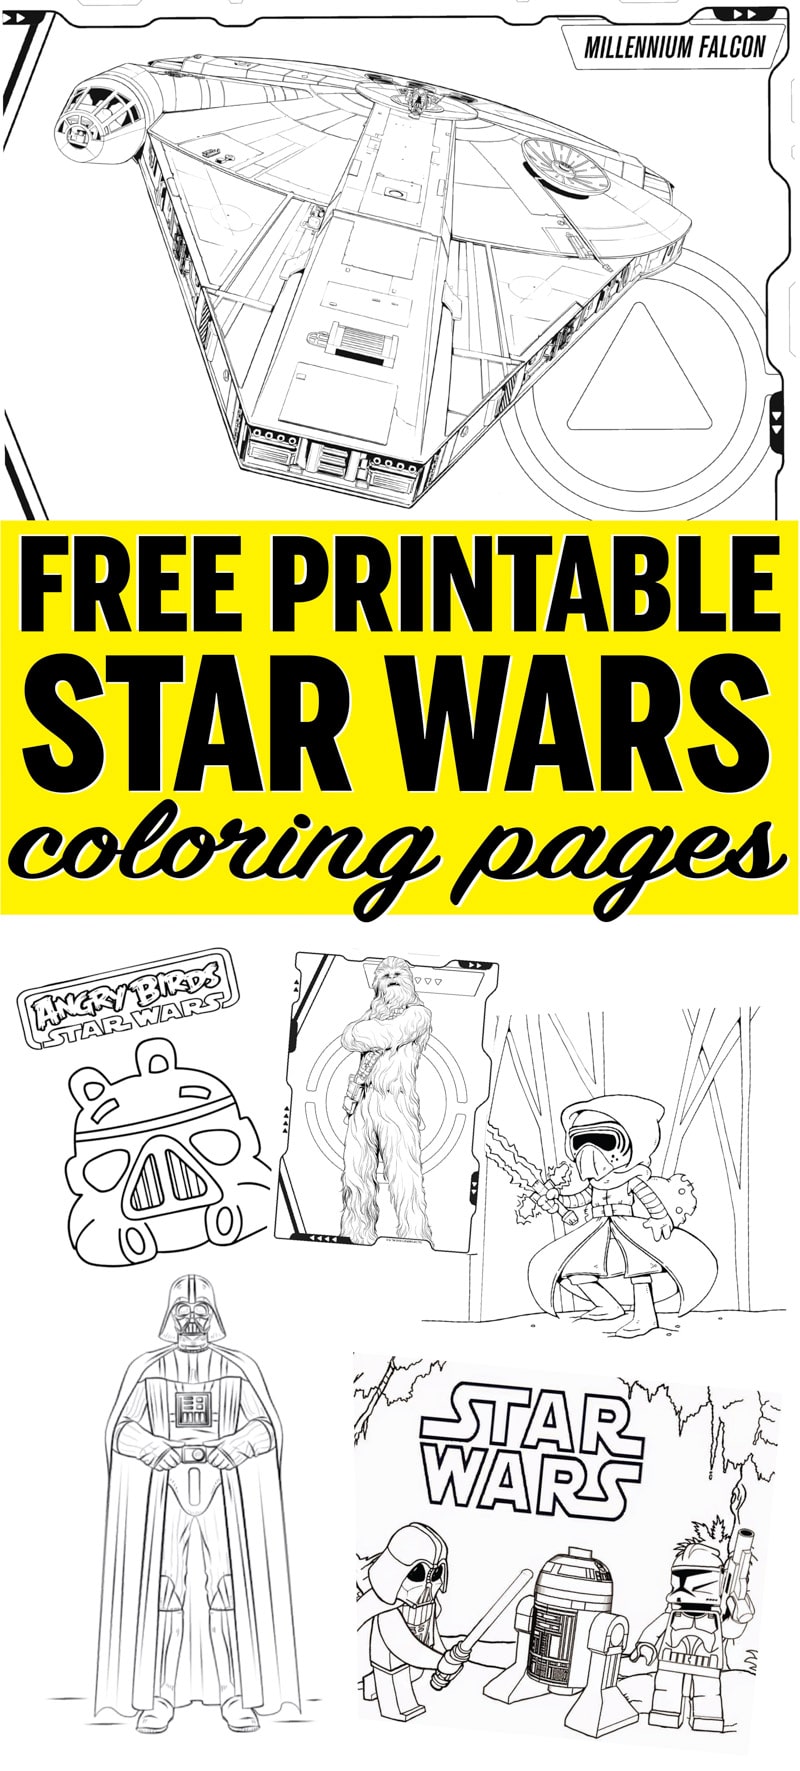 Download Free Printable Star Wars Coloring Pages Play Party Plan